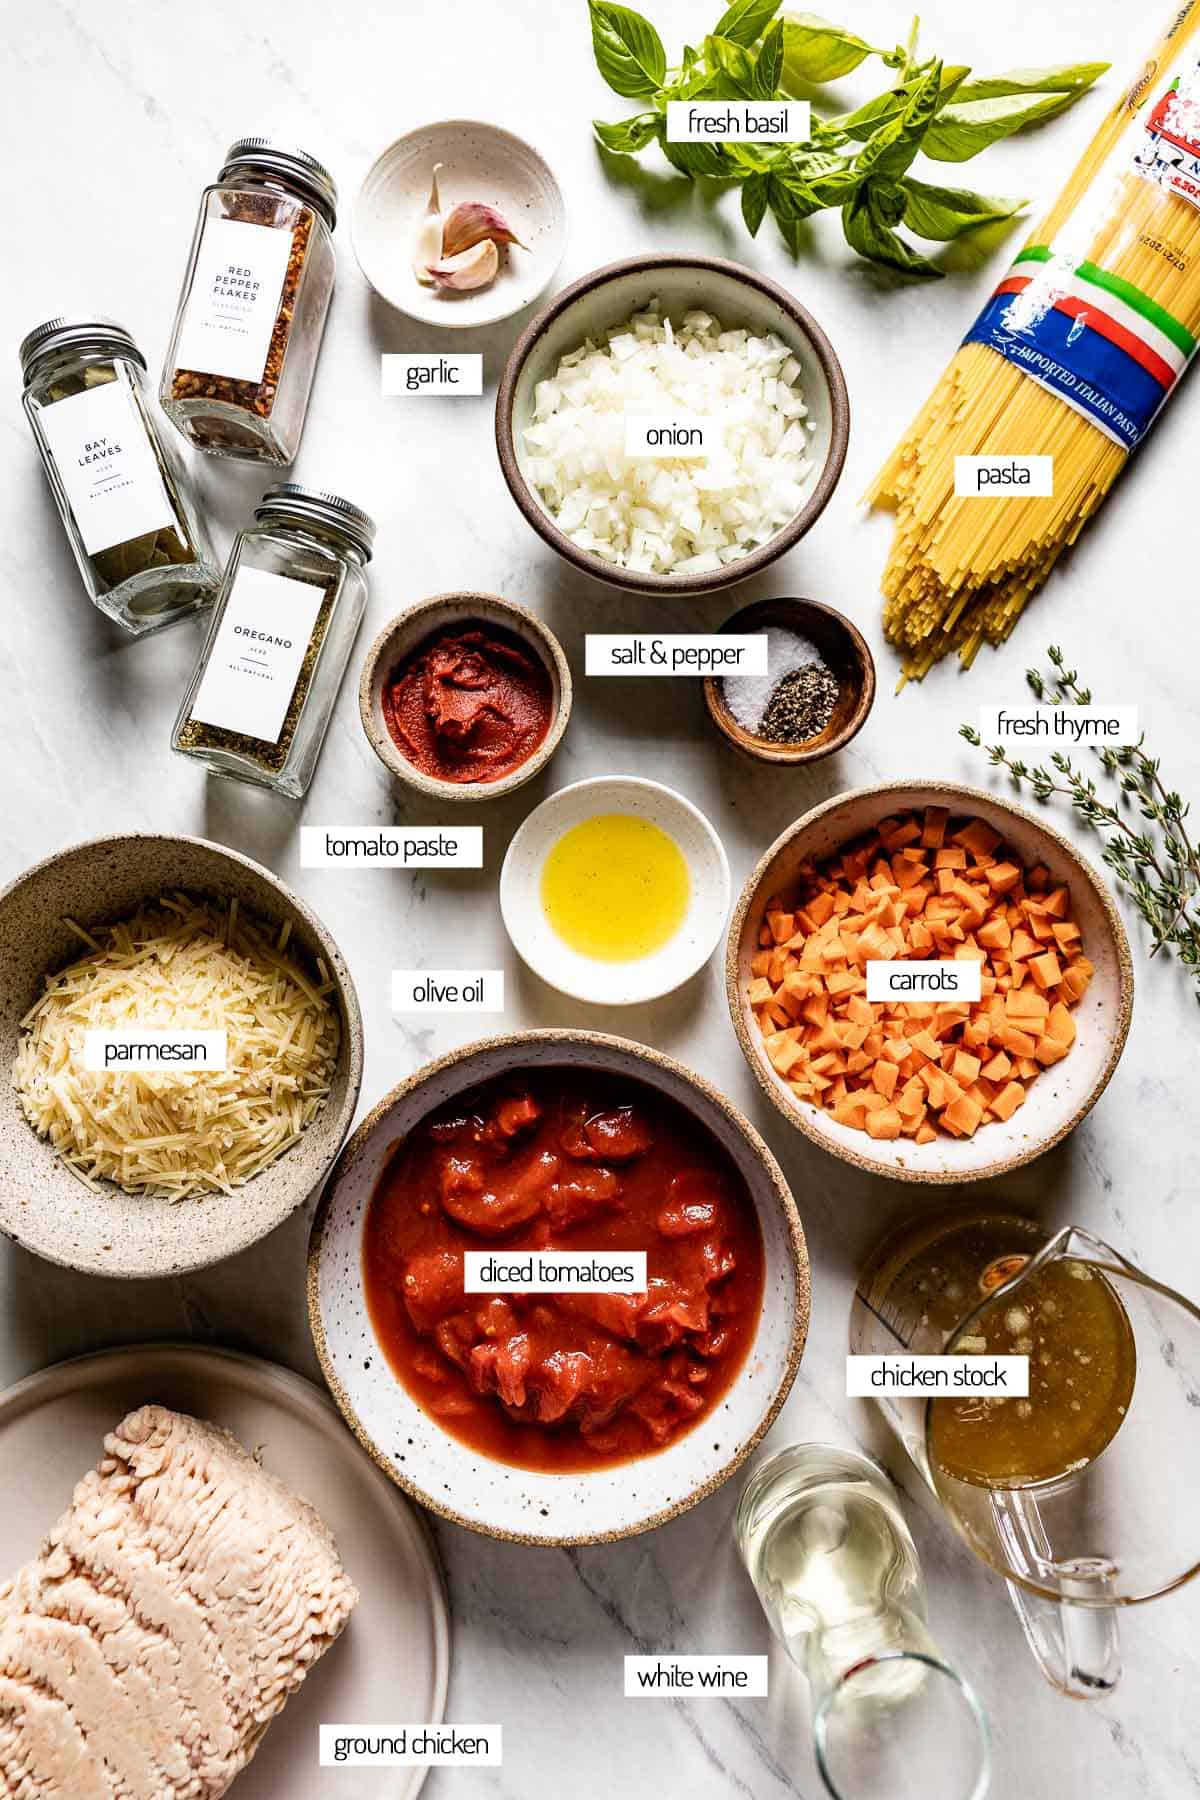 Ingredients for pasta with a tomato-based sauce from the top view.